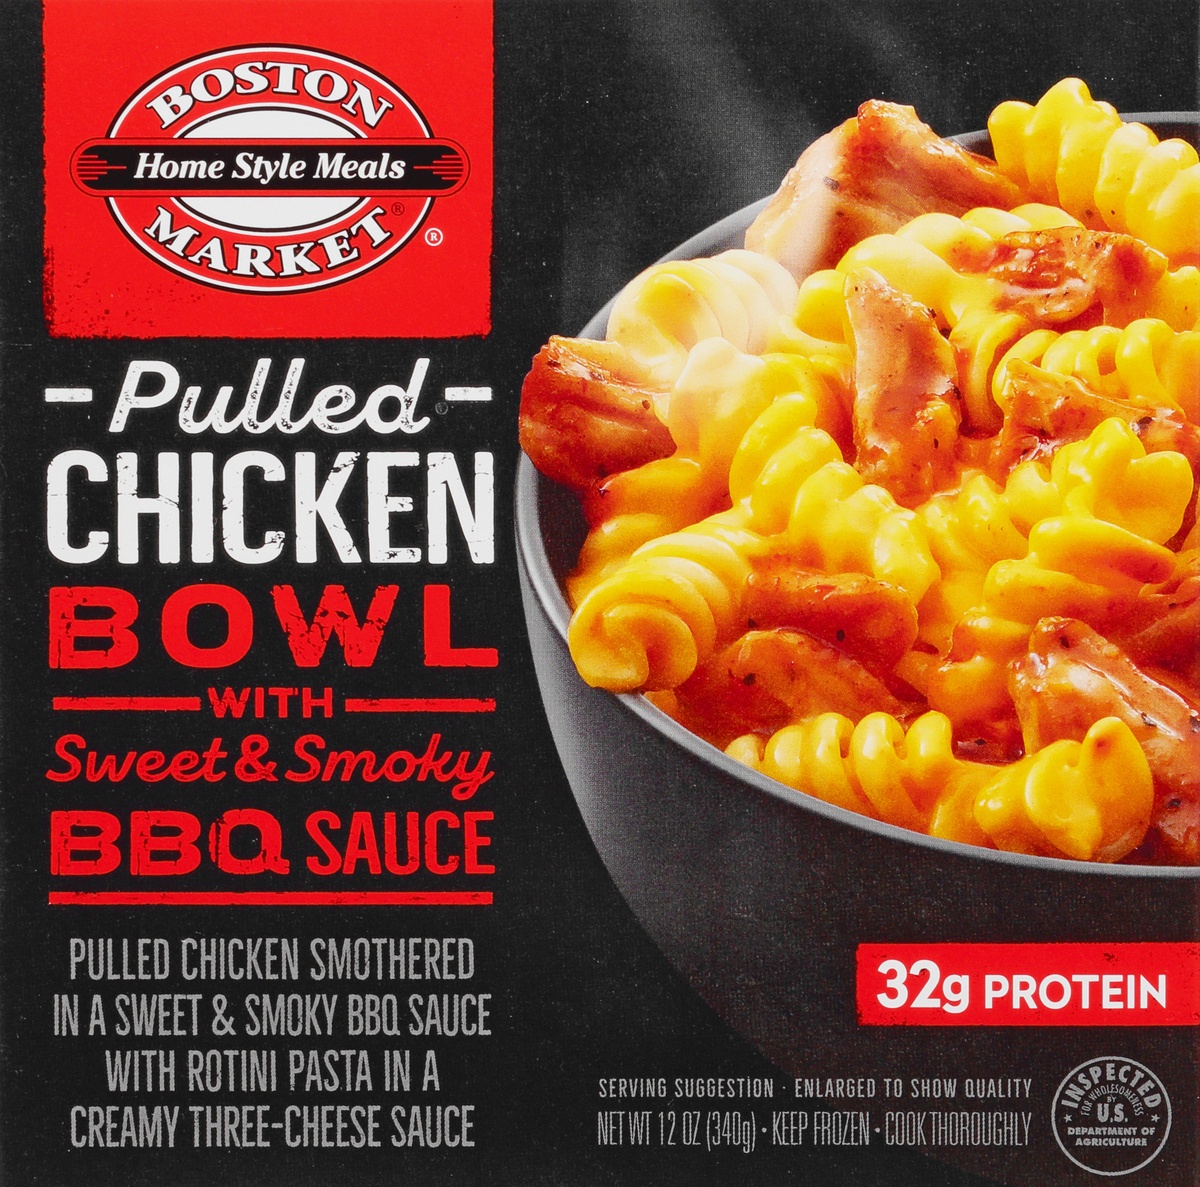 slide 9 of 11, Boston Market Home Style Meals Pulled Chicken Bowl with Sweet & Smoky BBQ Sauce, 12 oz